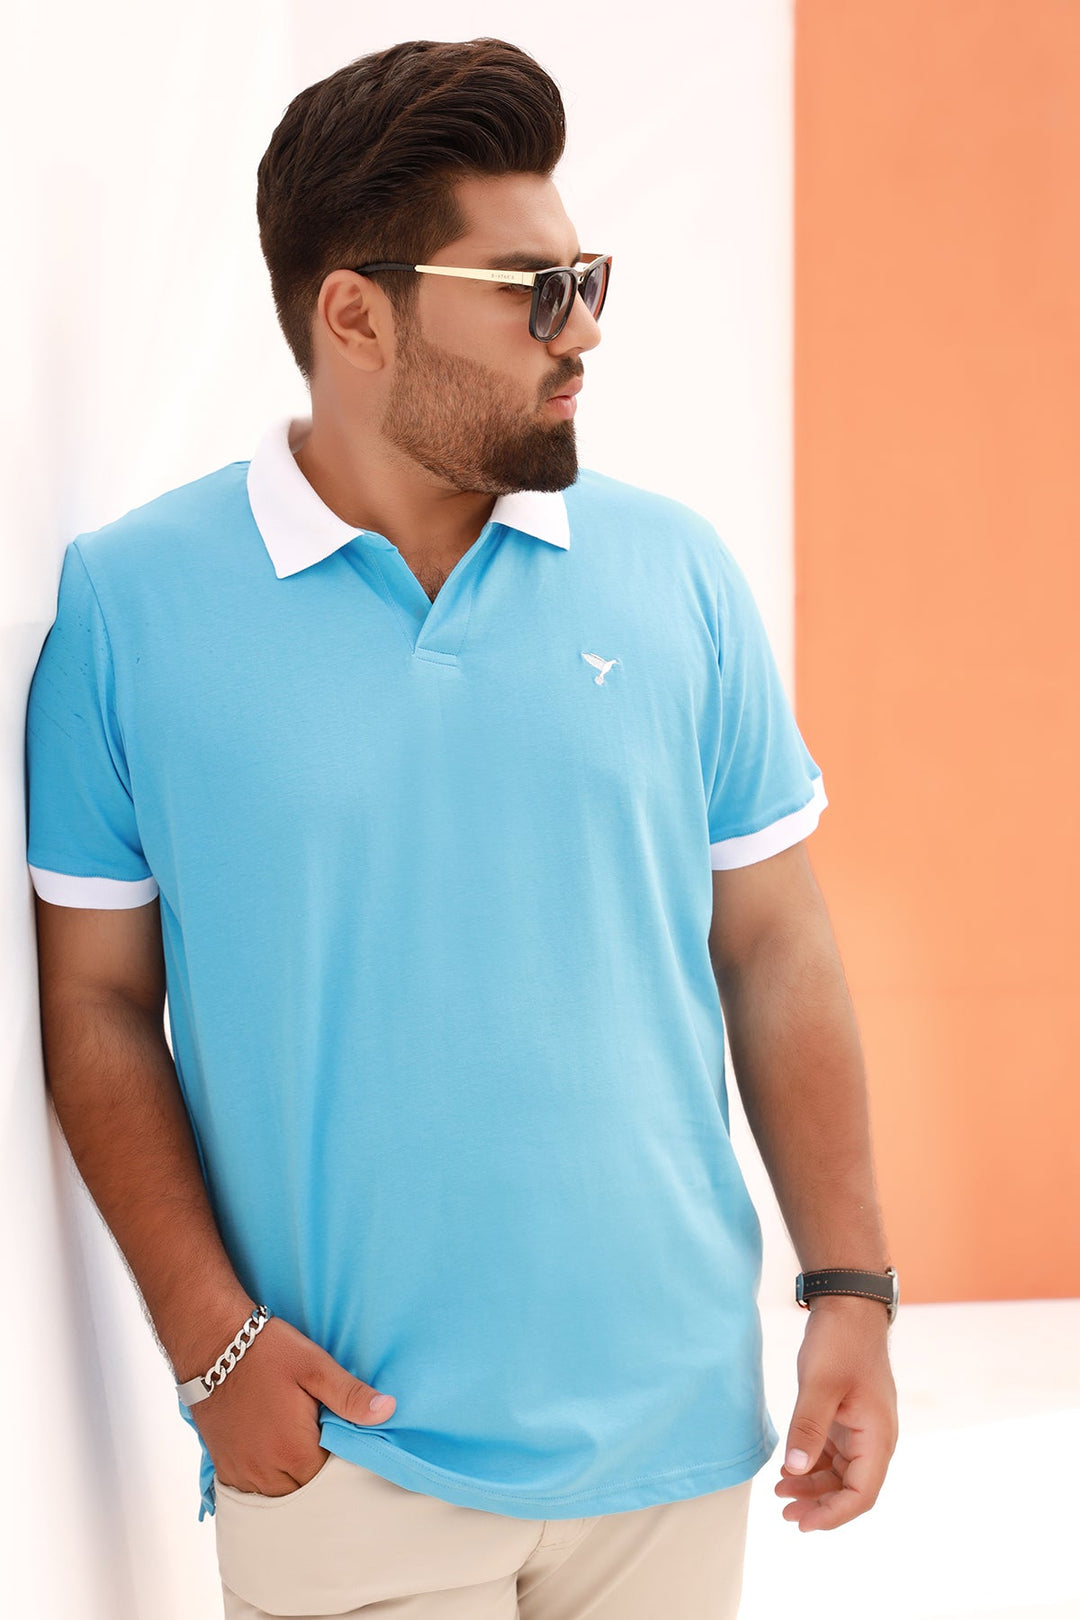 Mens Embroidered Polo Shirt Online Pakistan